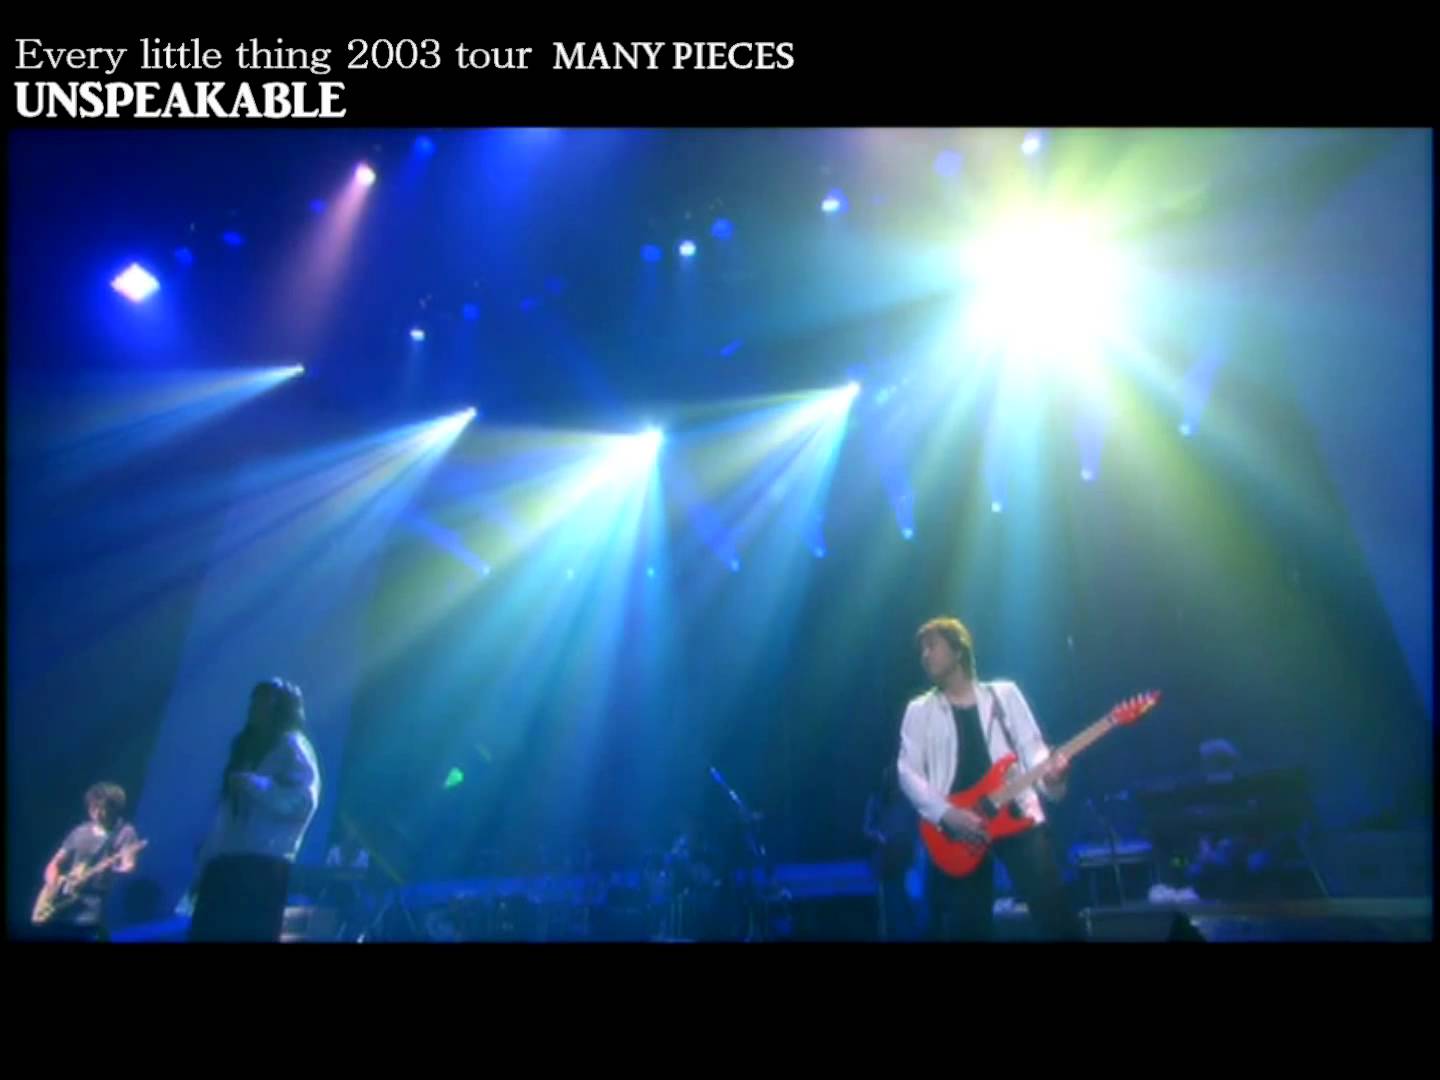 Every Little Thing － UNSPEAKABLE ／ tour 2003 MANY PIECES 〔歌詞付き〕　[4:3] - YouTube